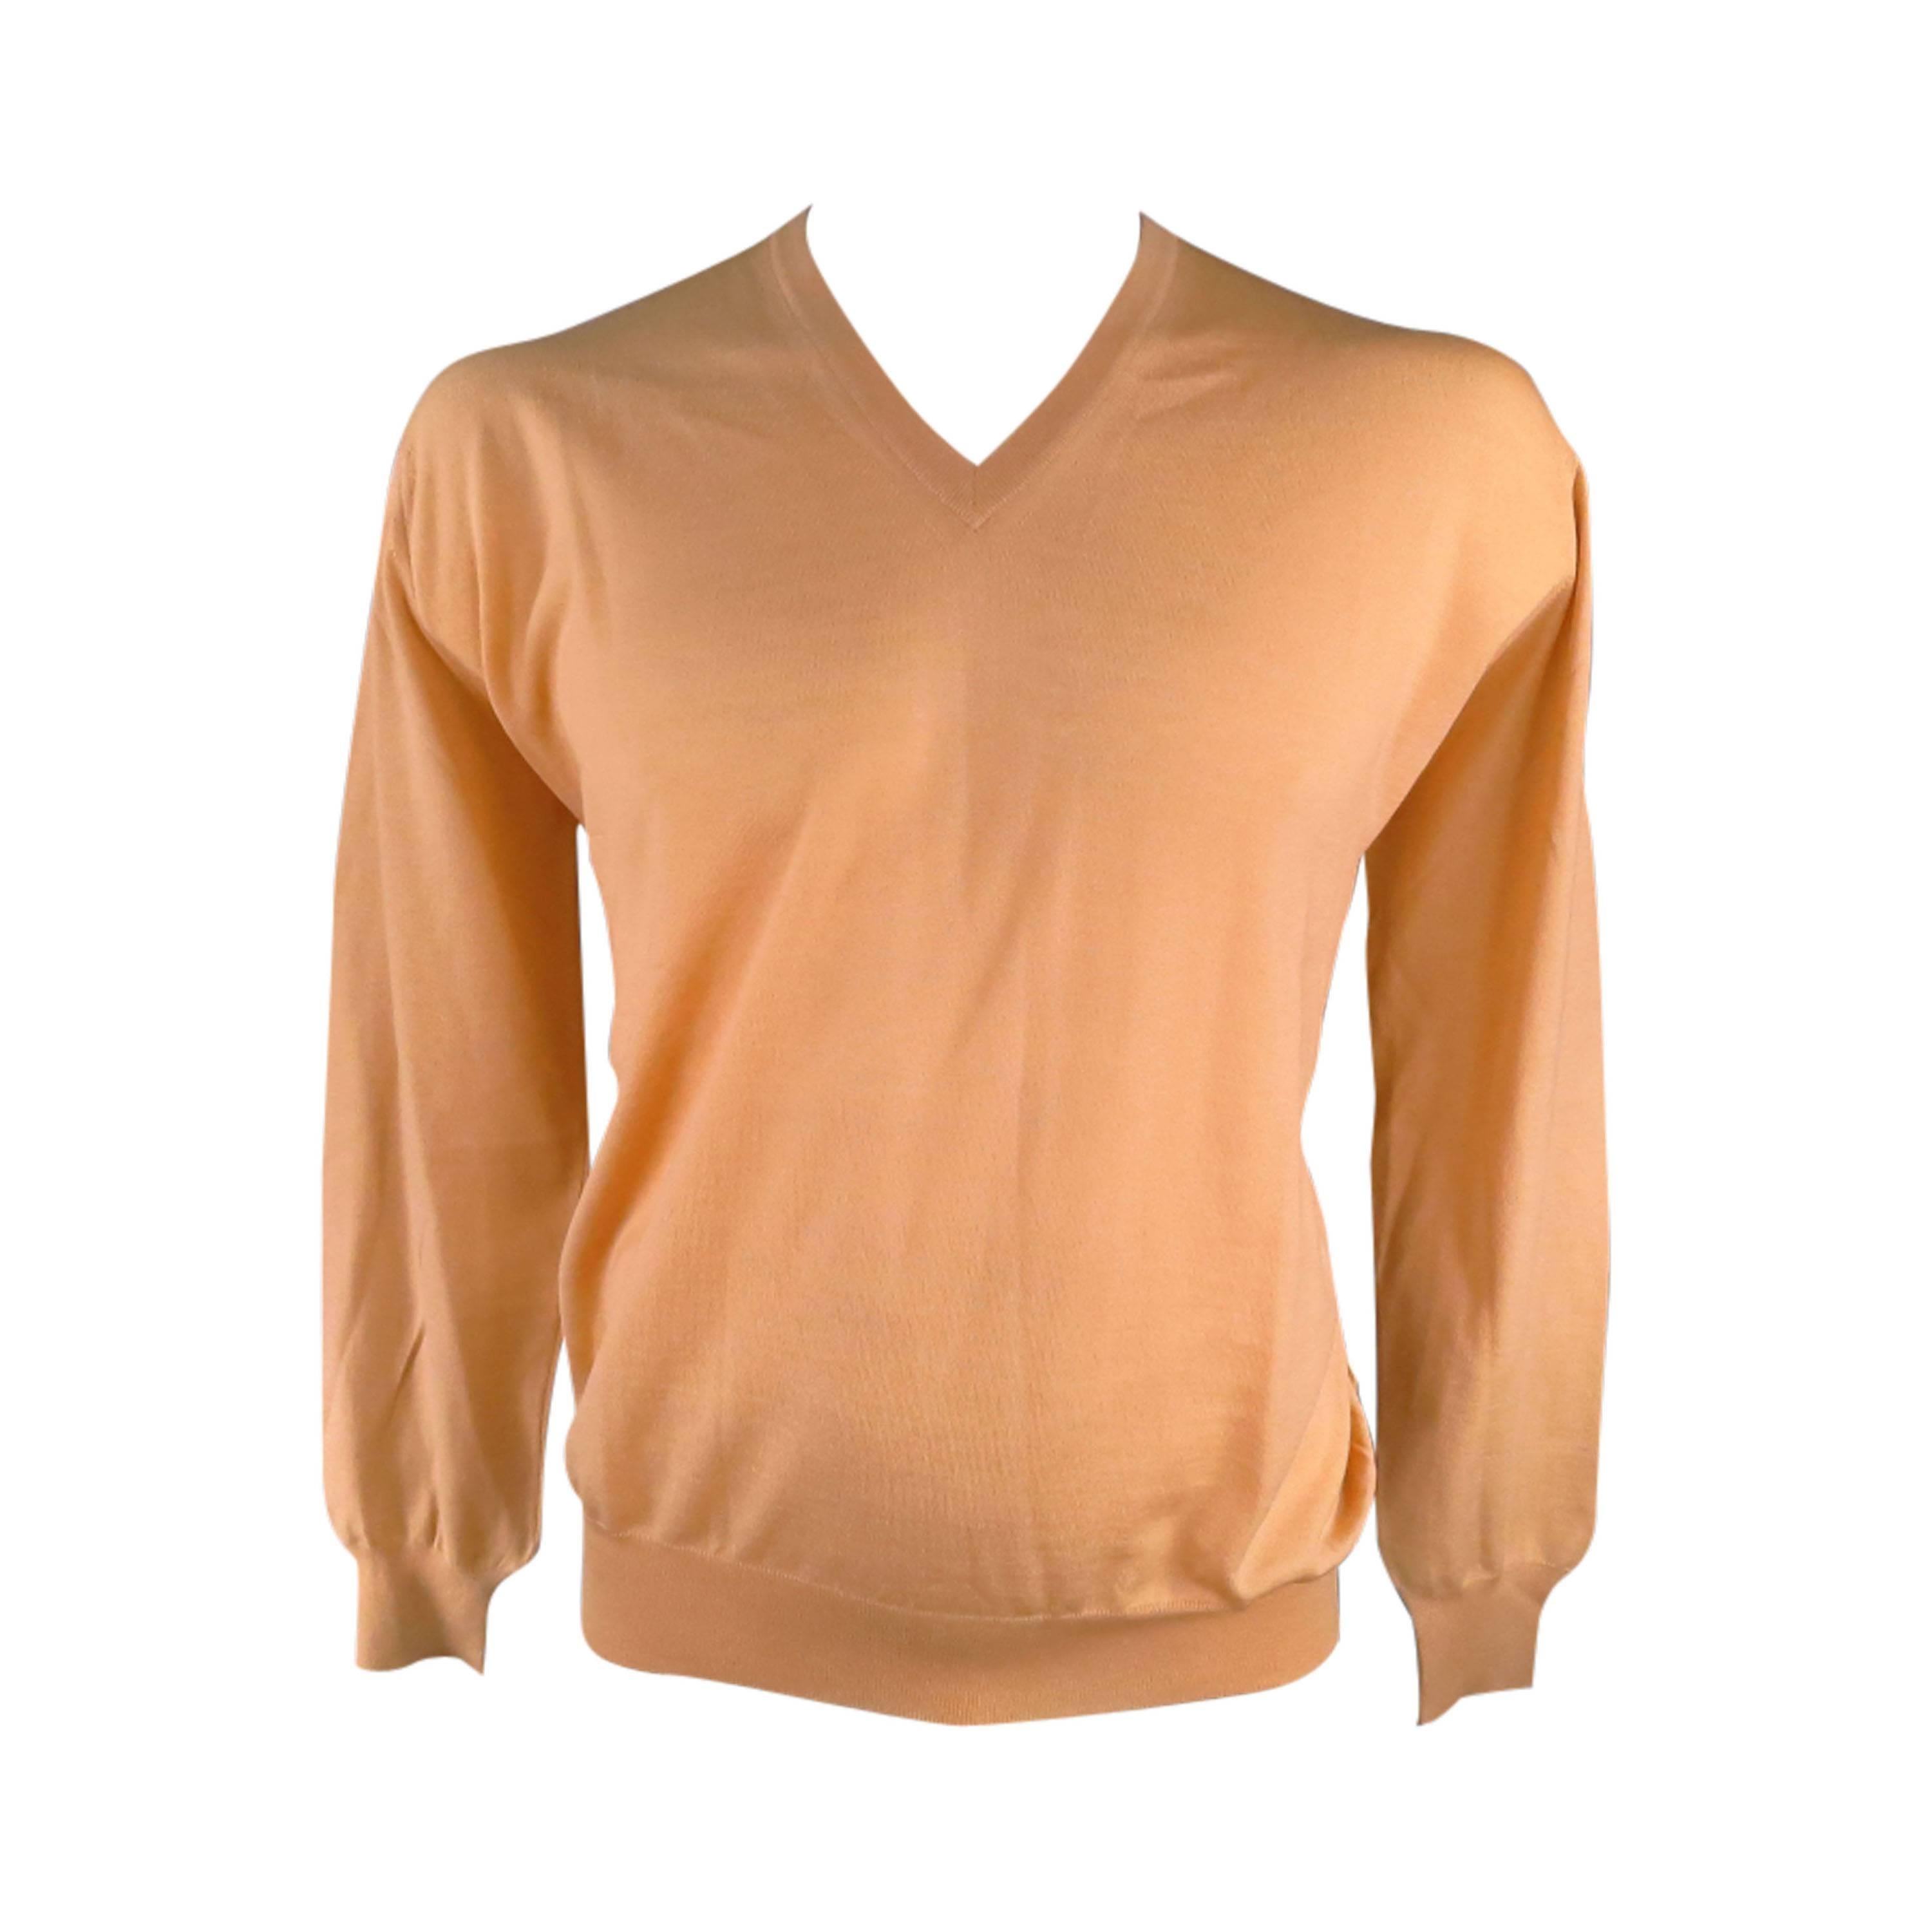 Gianni Versace Peach Nude Wool V Neck Pullover Sweater